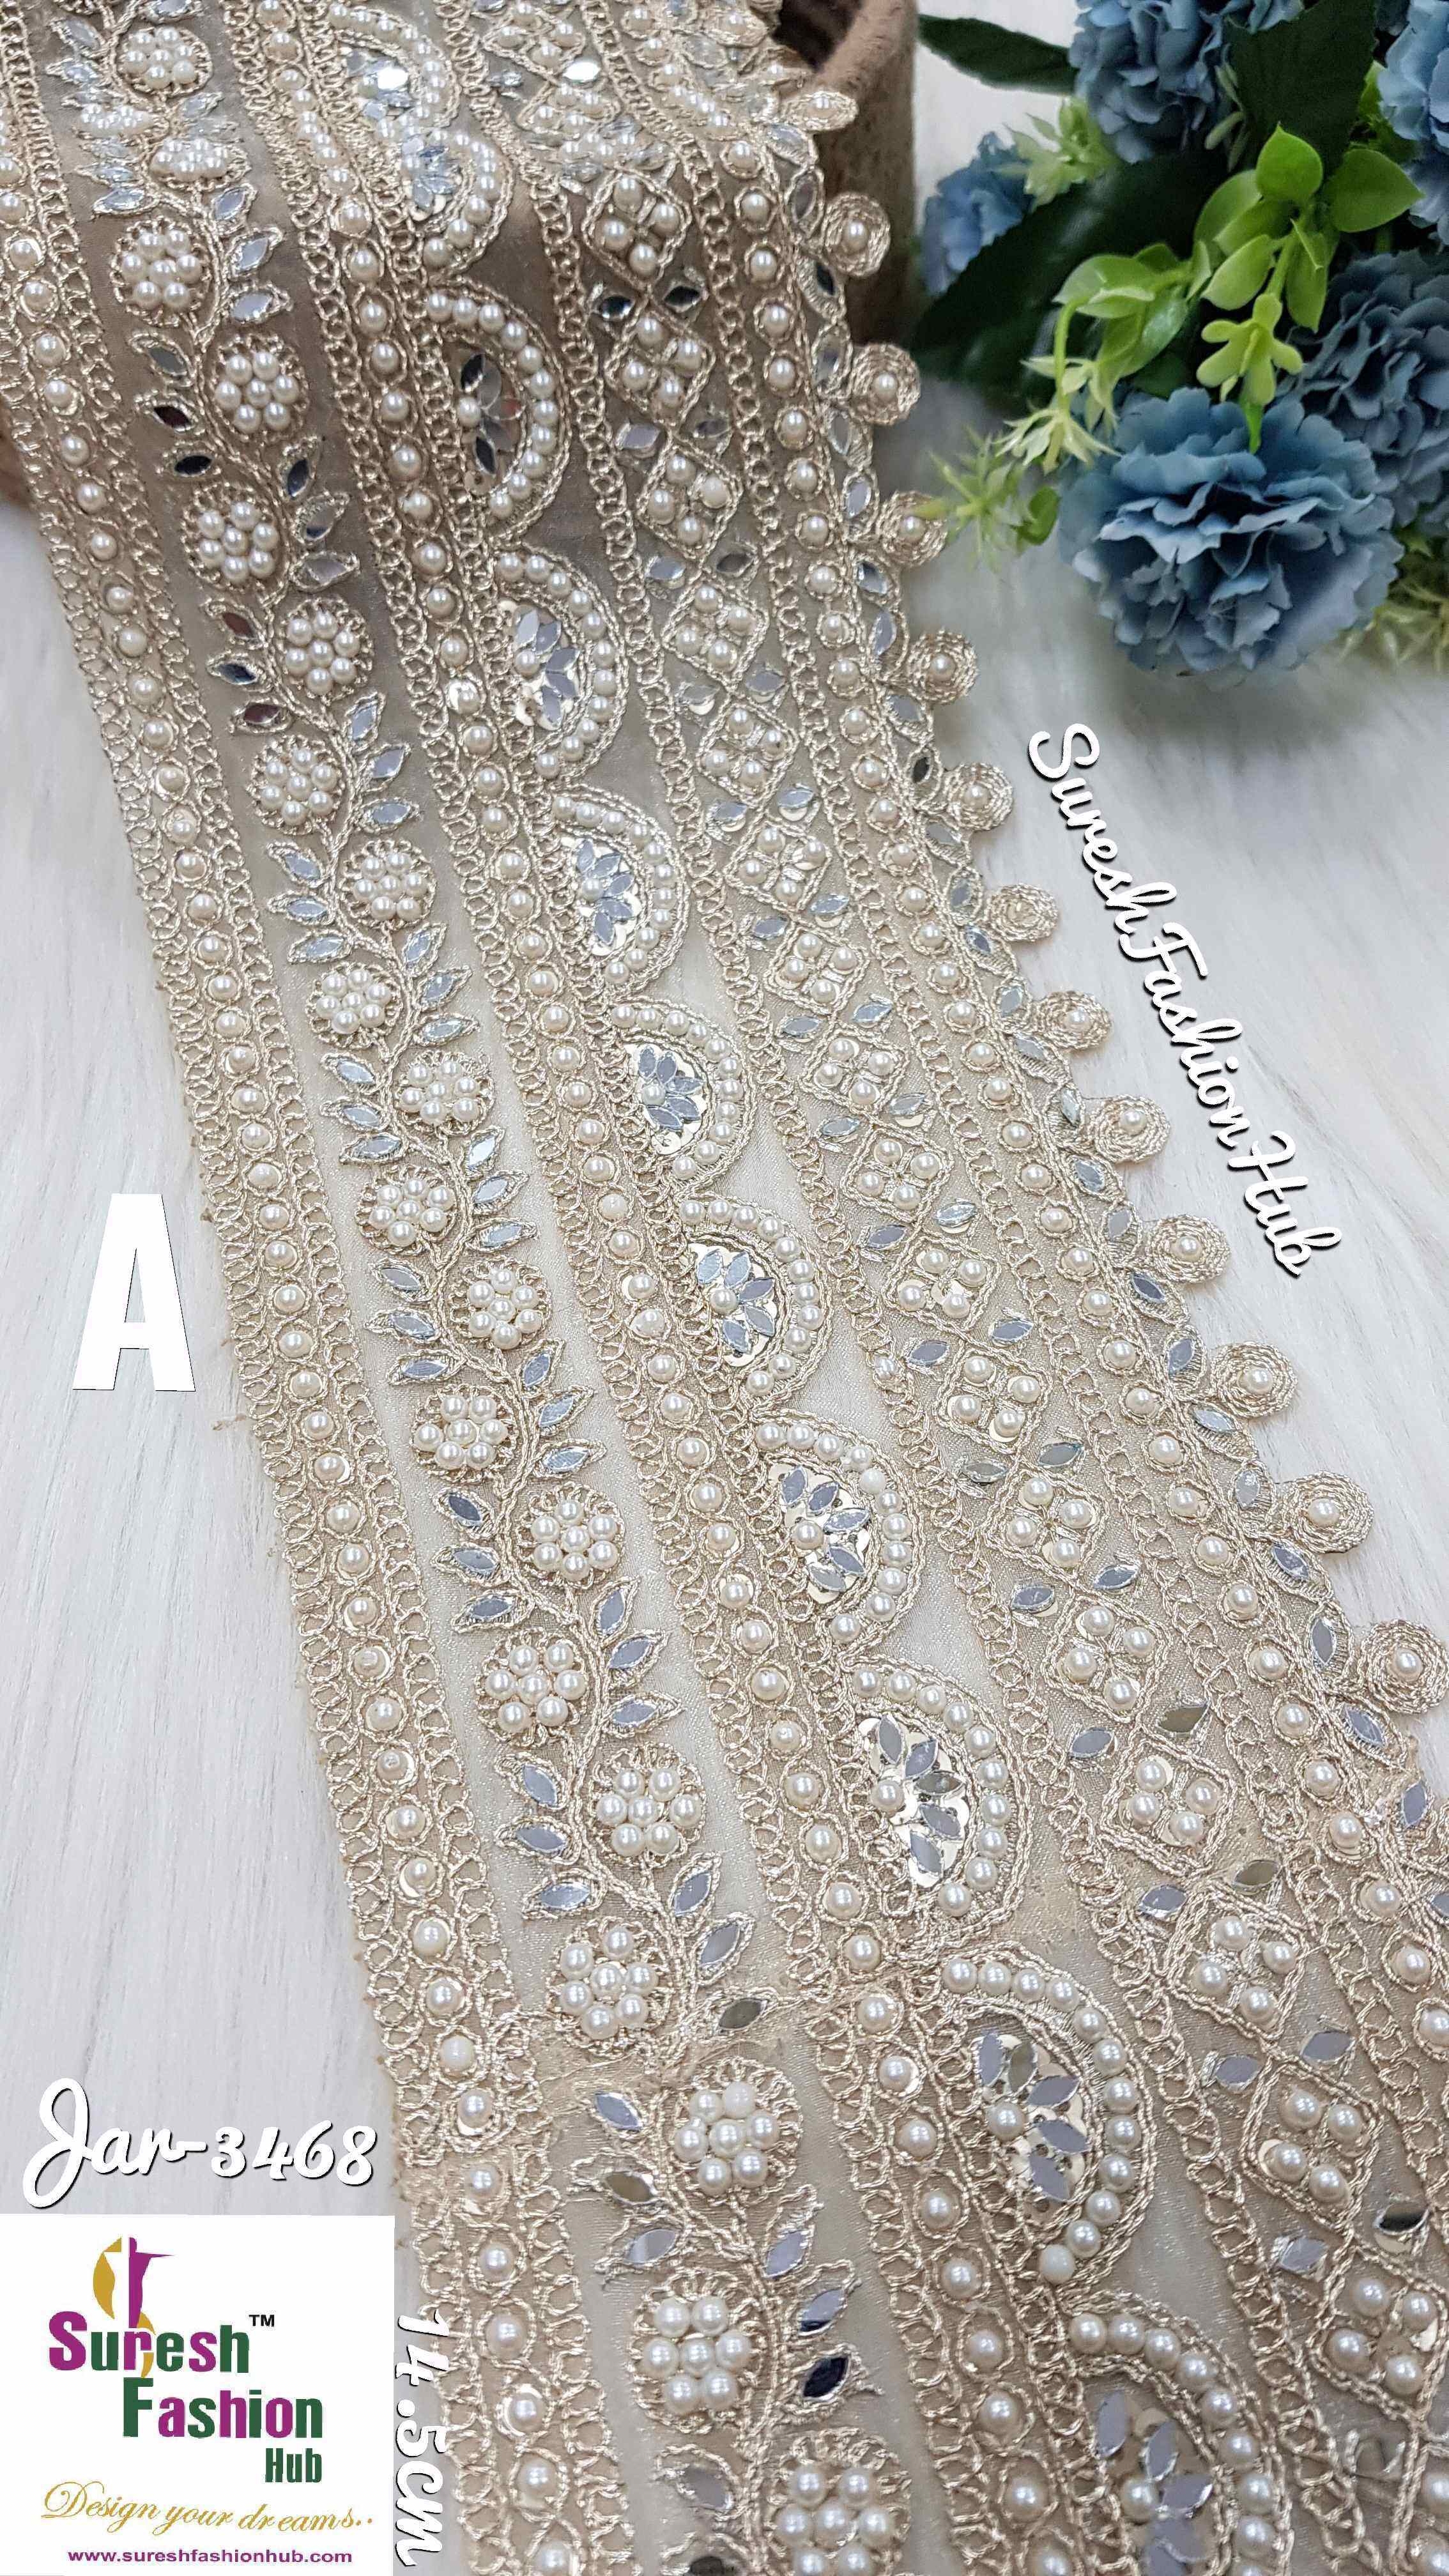 https://cdn.fynd.com/v2/falling-surf-7c8bb8/fyprod/wrkr/products/pictures/item/free/original/XFCsgBa6f-Pearl-Ivory-Elegance-Pearl-and-Mirror-Laces.jpeg